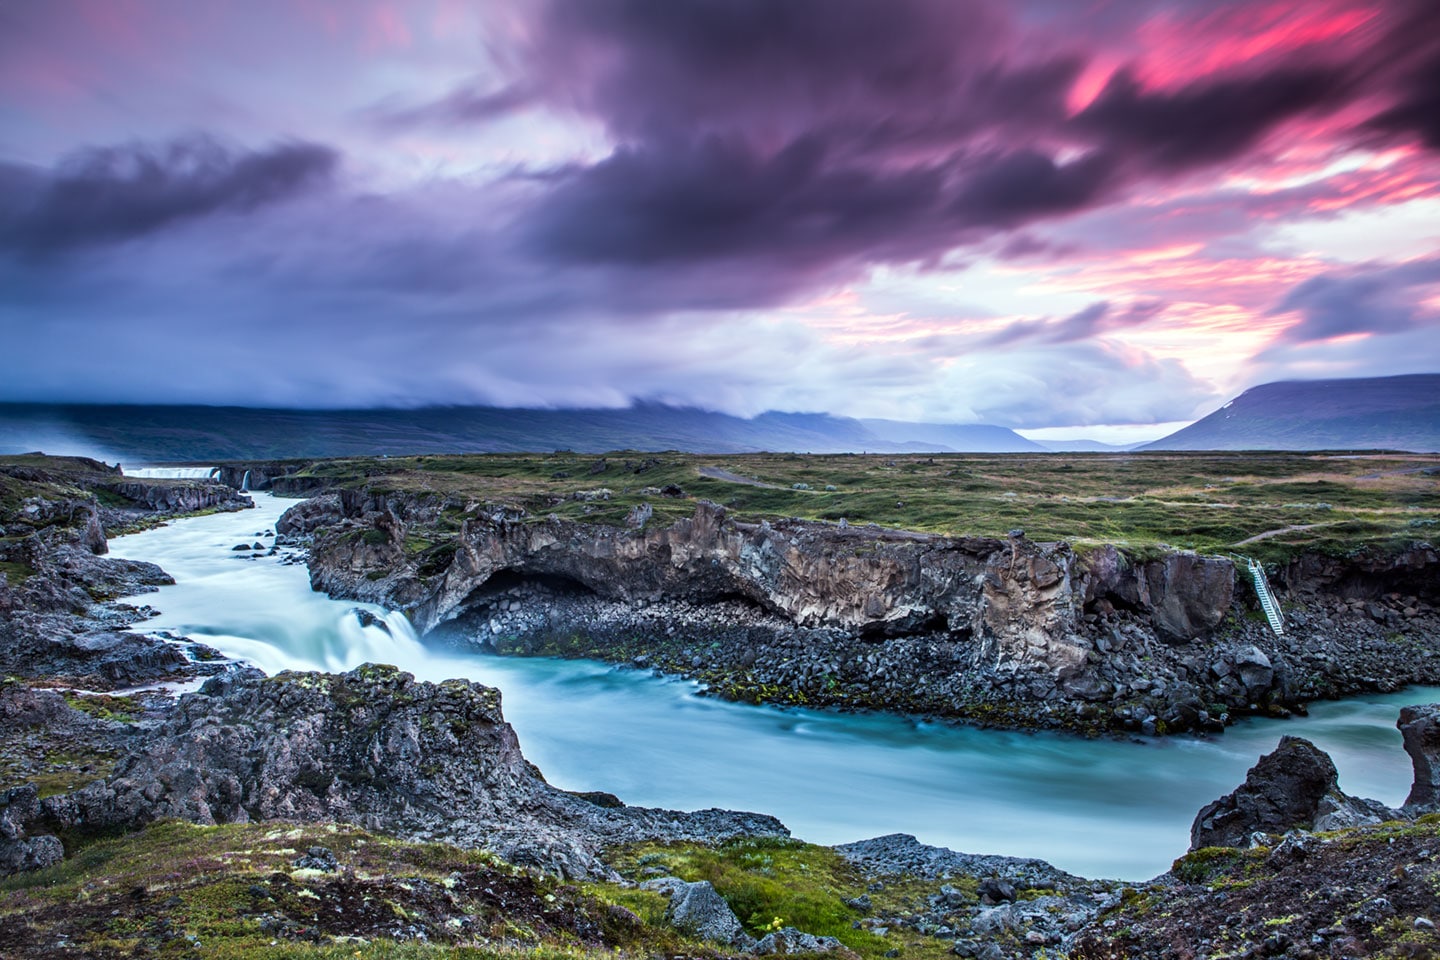 Godafoss watefall at sunset in northern Iceland